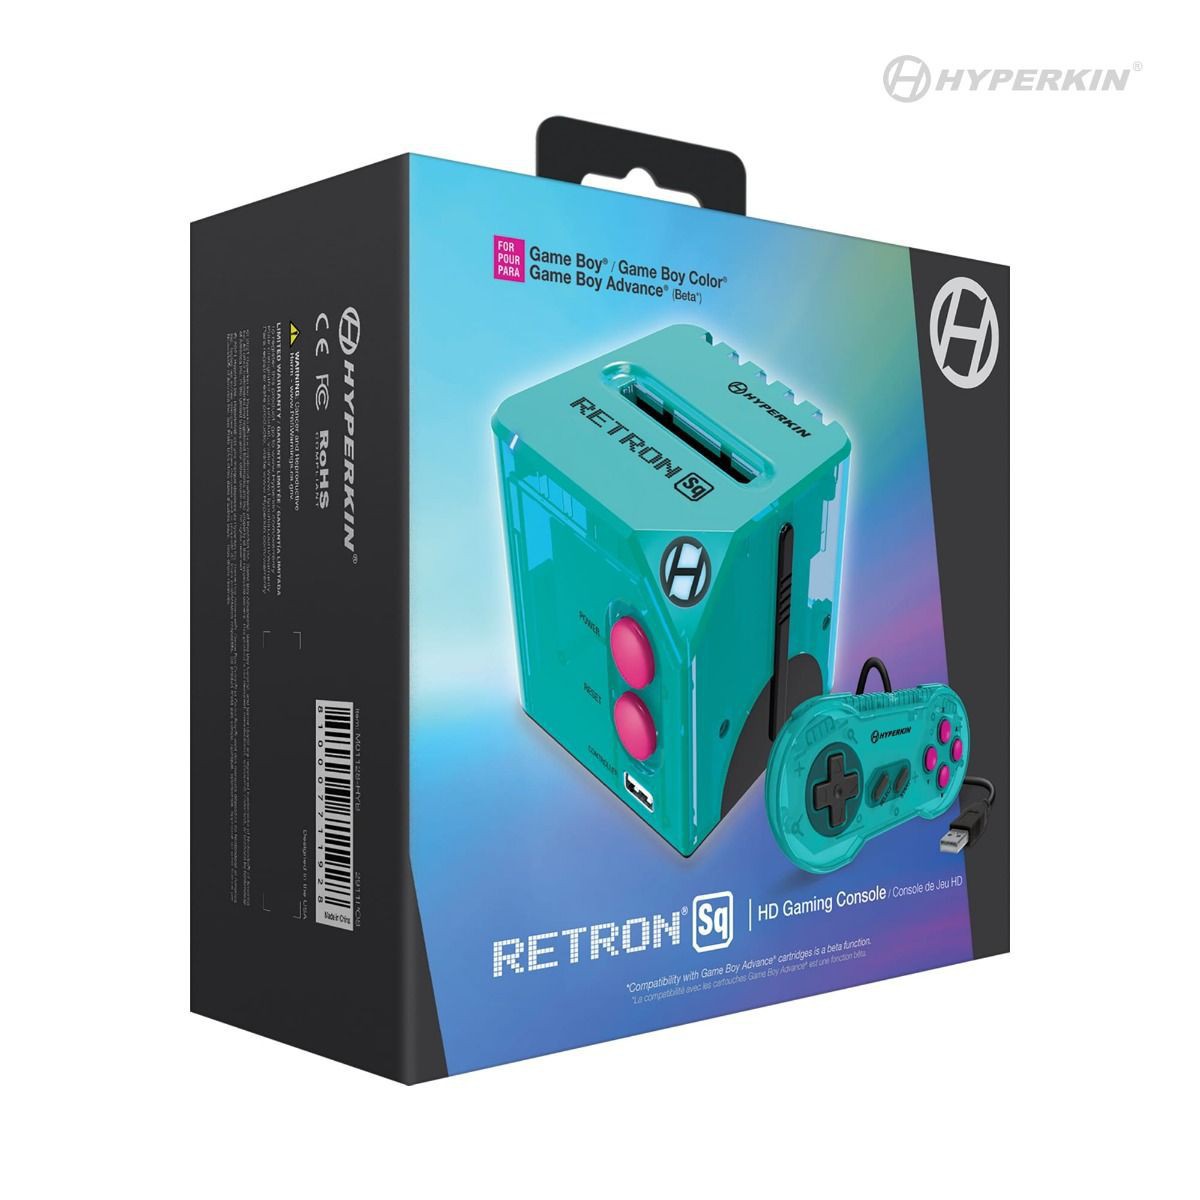 RetroN Sq Gaming Console (HDMI) - Blue/Pink - Gameboy Color Hardware